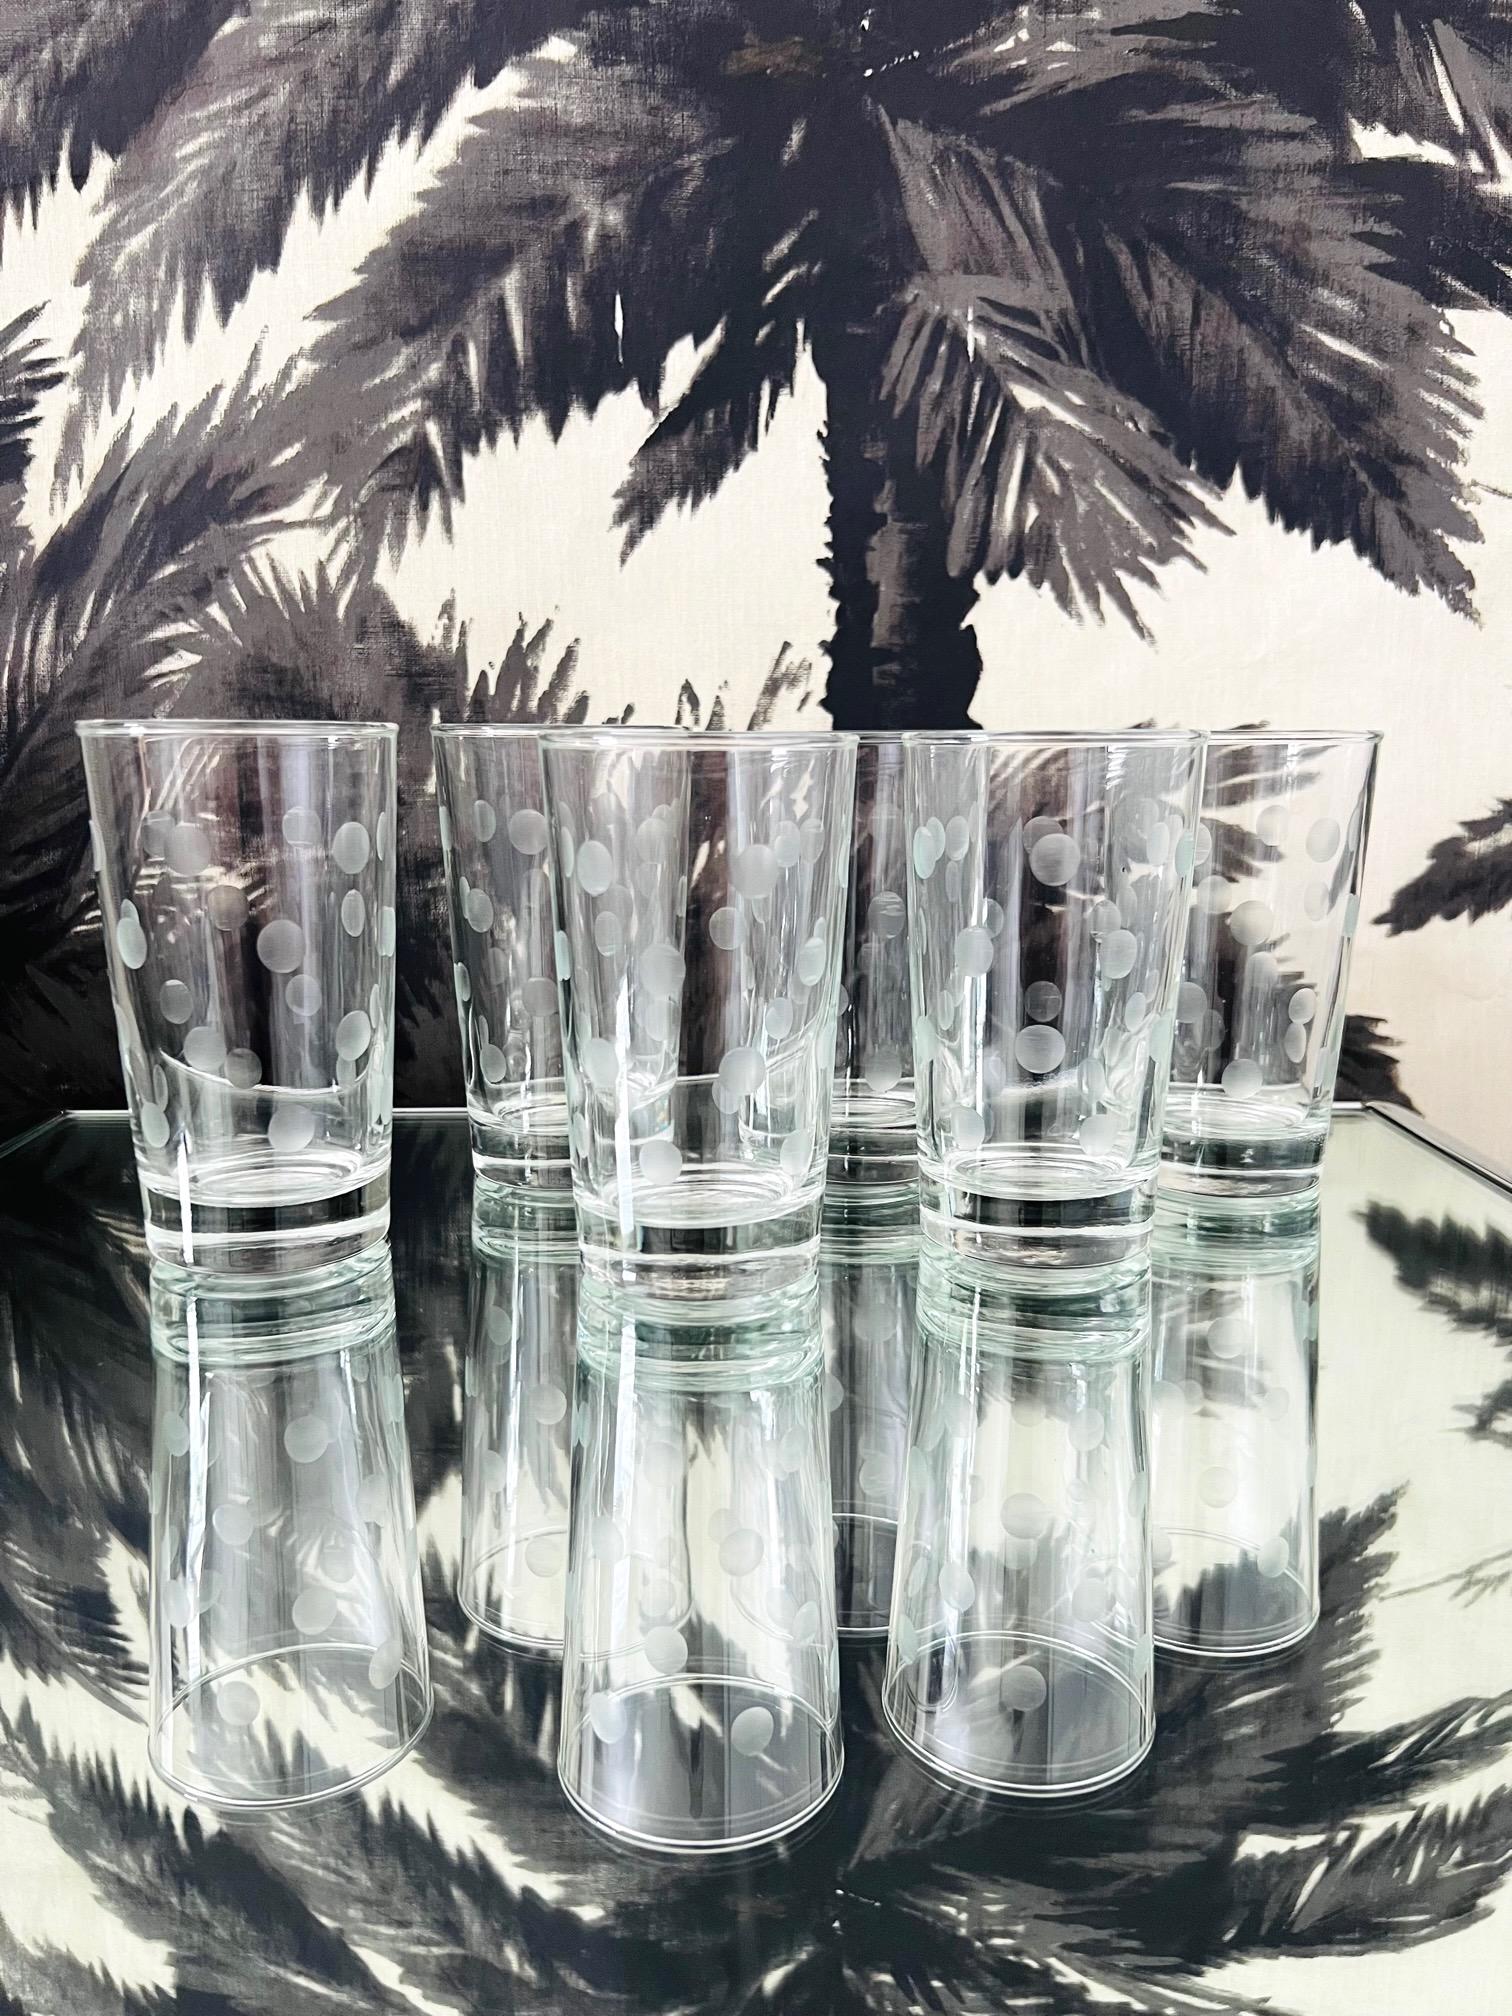 Mid-Century Modern handcrafted barware glasses with etched polka dot design. The vintage glassware set holds 8 ounces of your favorite cocktail or can be used as juice or water glasses. Makes a chic addition to any barware collection or tableware